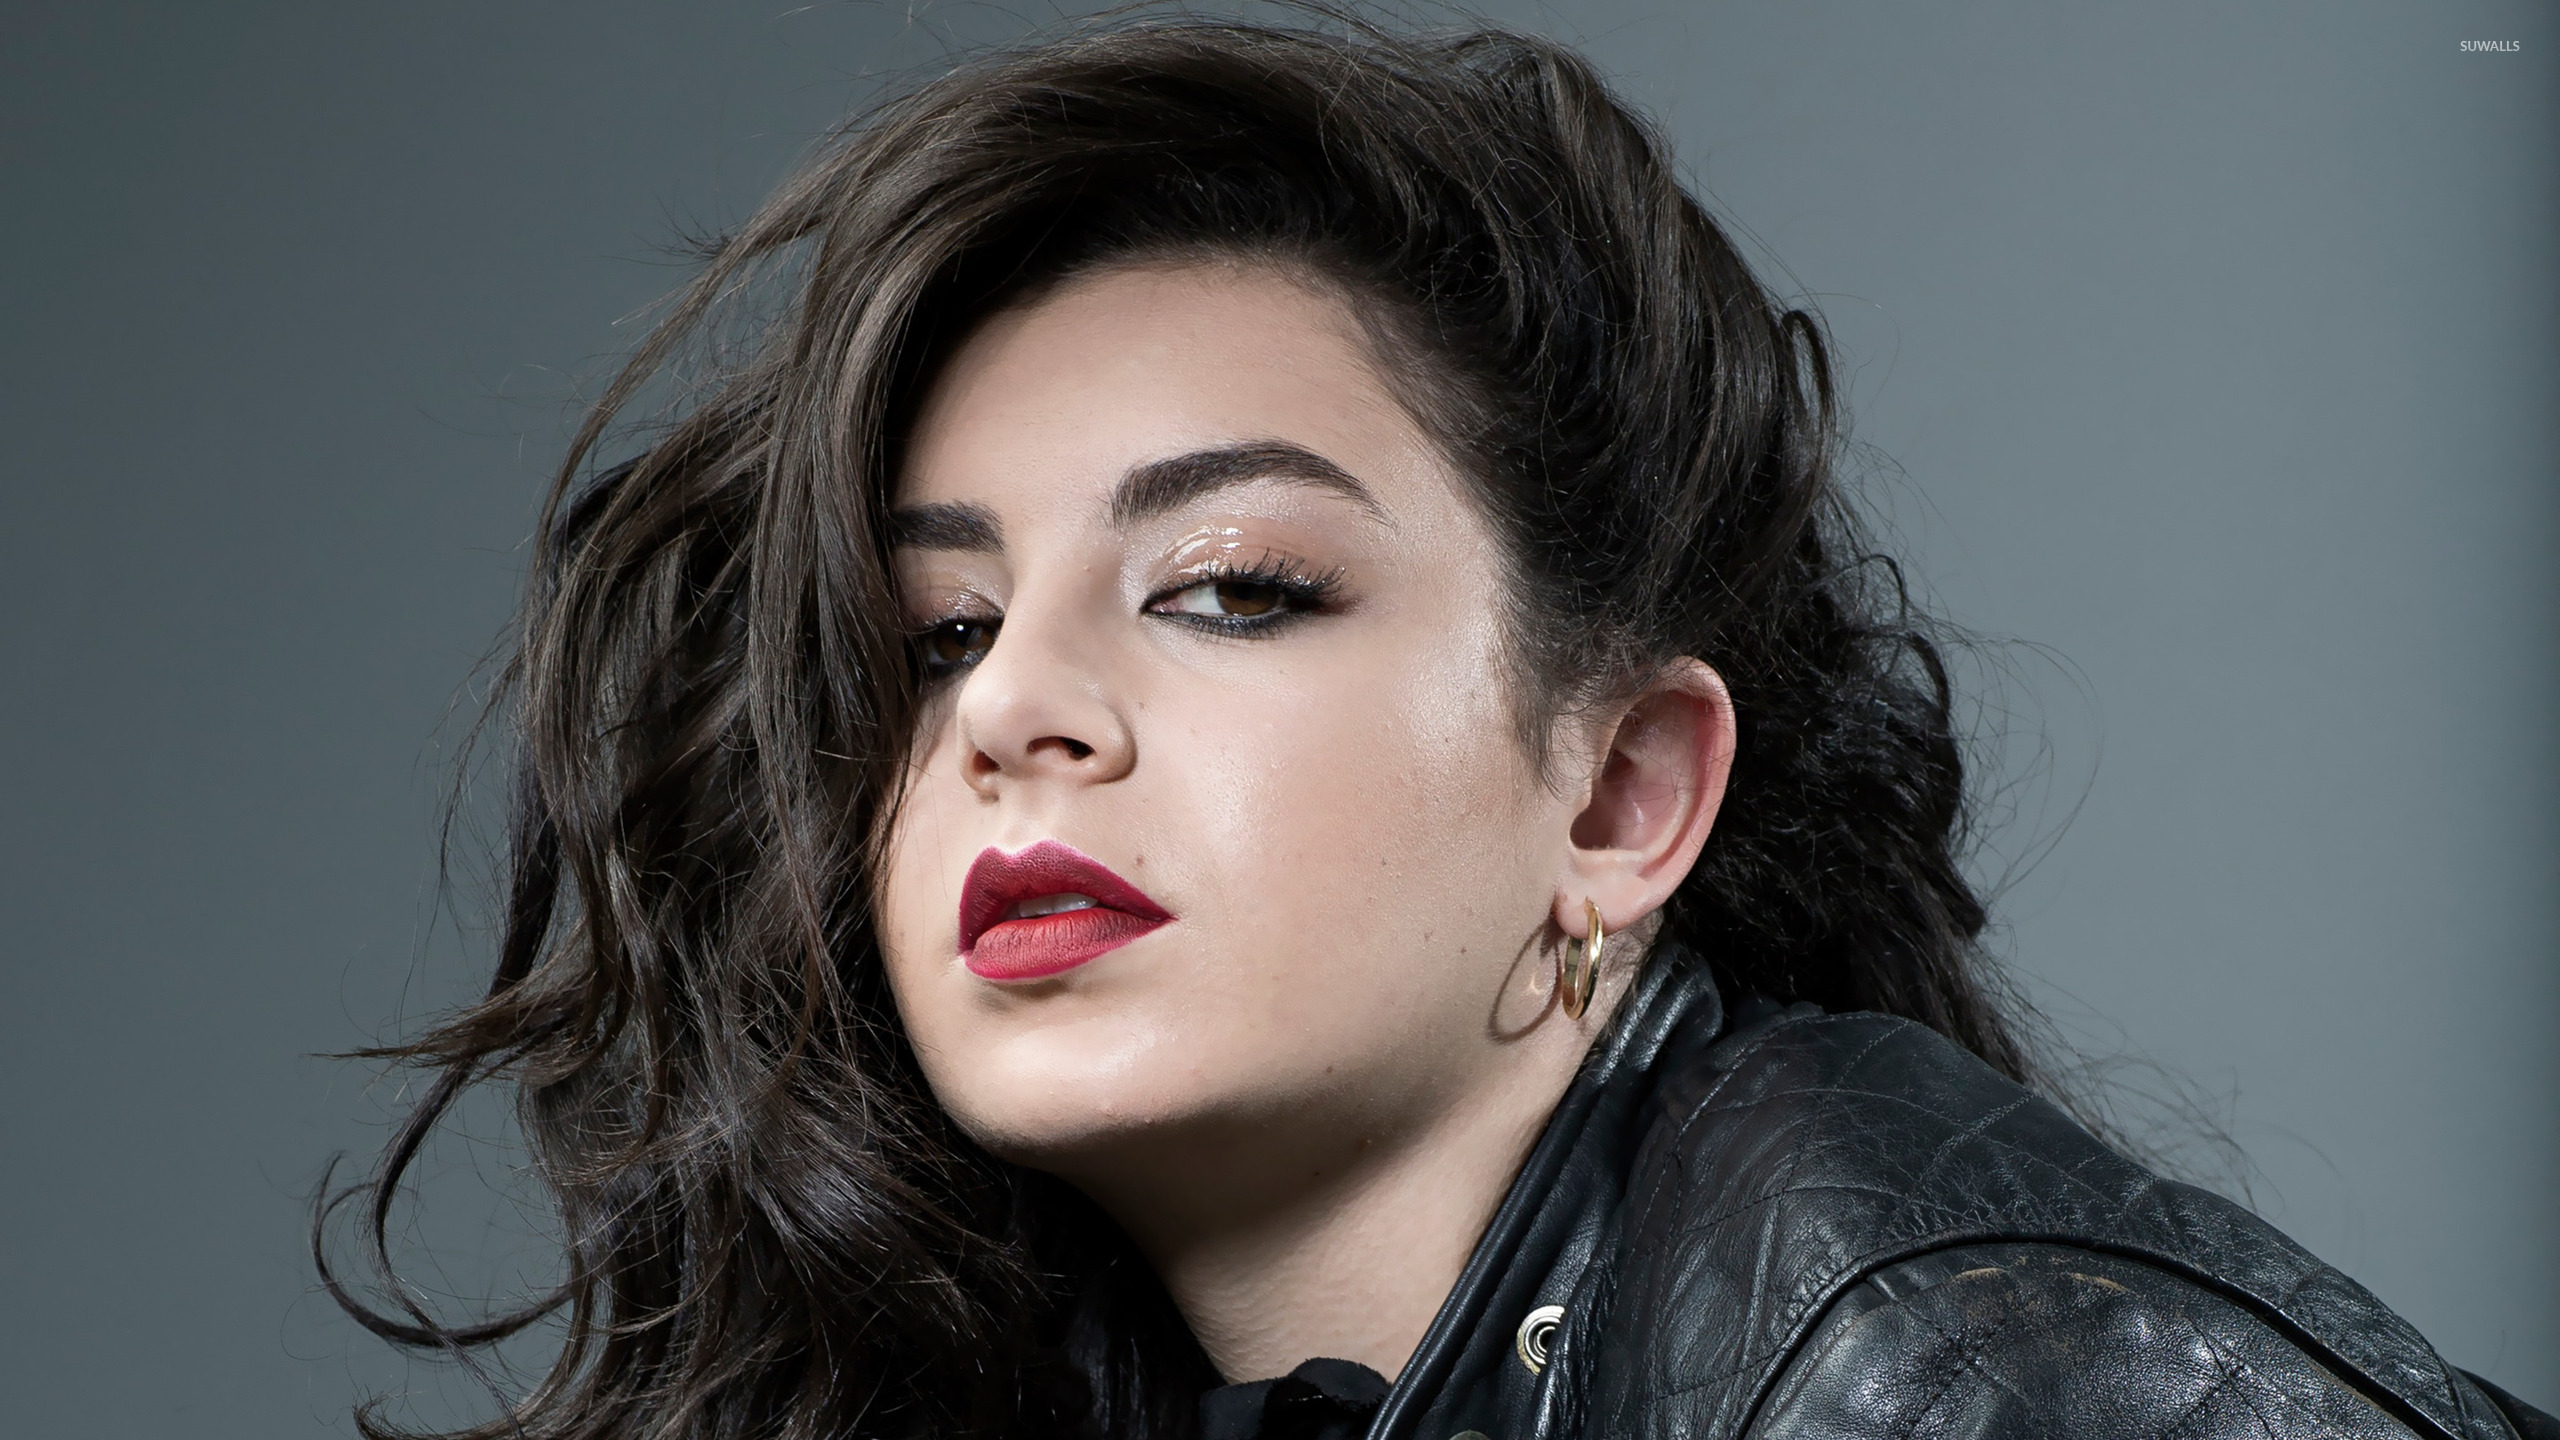 Charli XCX wallpaper - Celebrity wallpapers - #32255